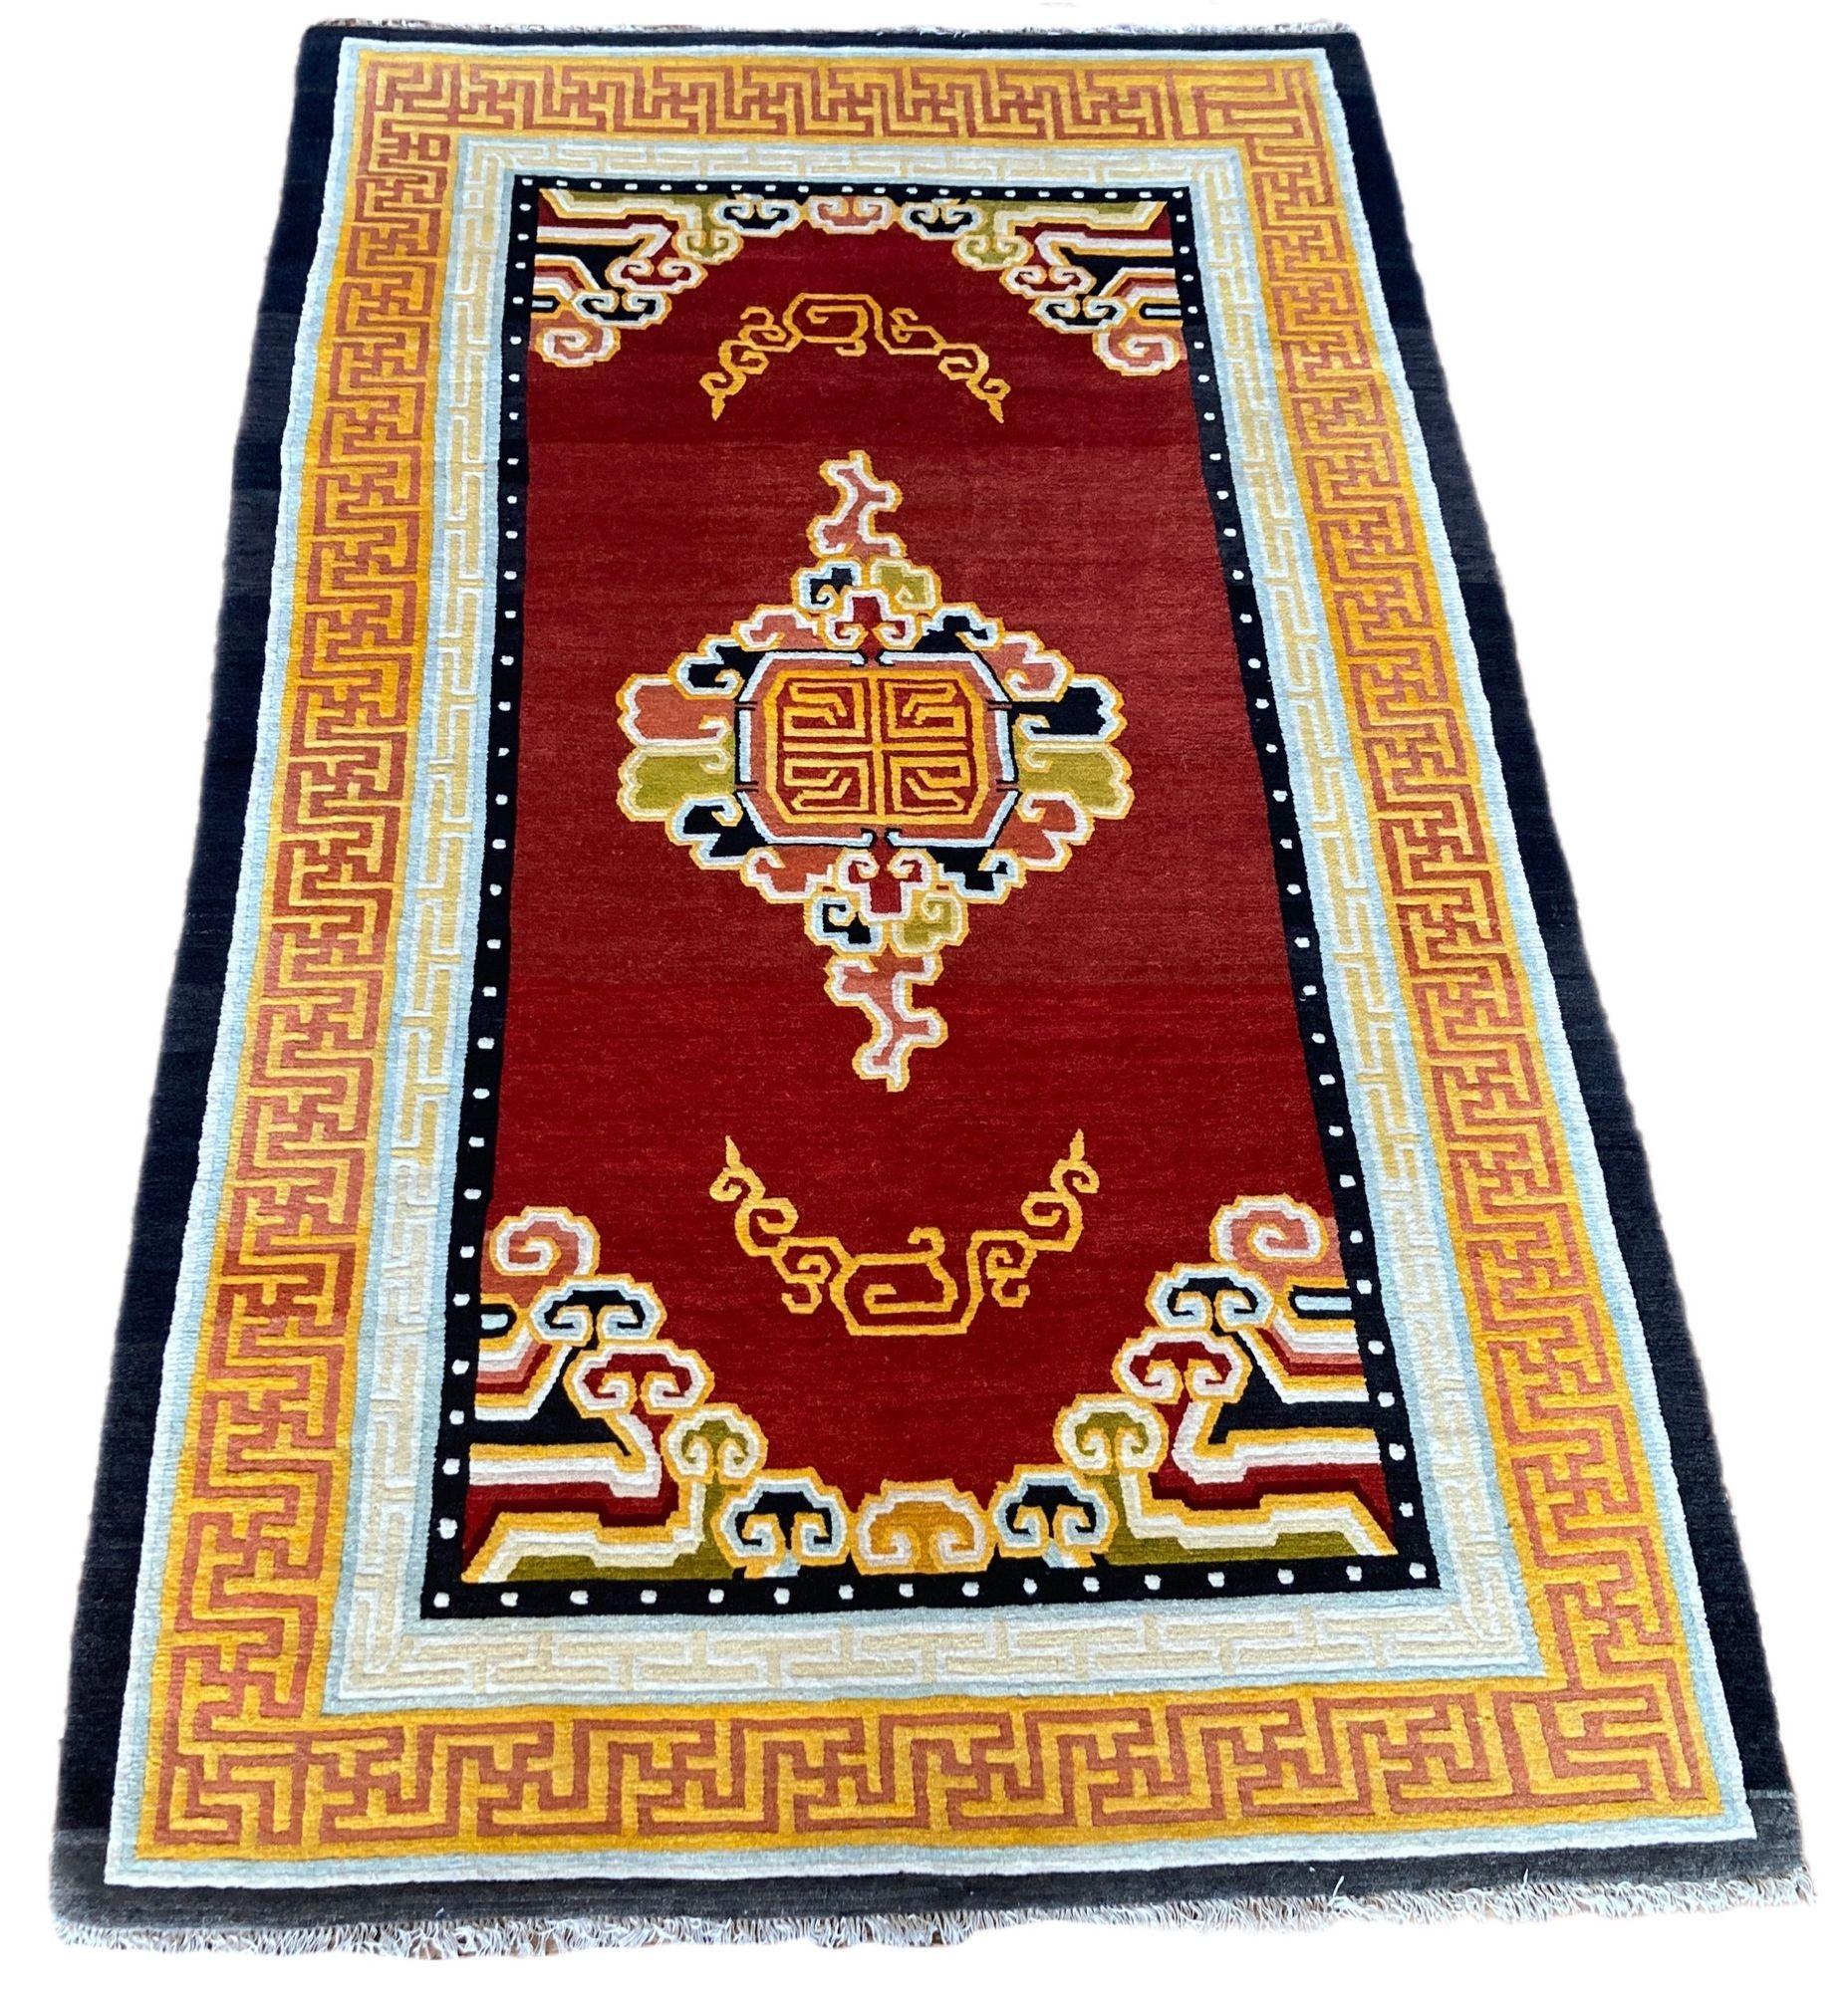 A fabulous 1930’s Tibetan rug with a simple cloudband design on an open red field surrounded by a red and gold key border. One of a pair!
Size: 2.11m x 1.24m (6ft 11in x 4'ft 1in)
This rug is in good overall condition with very light, age related